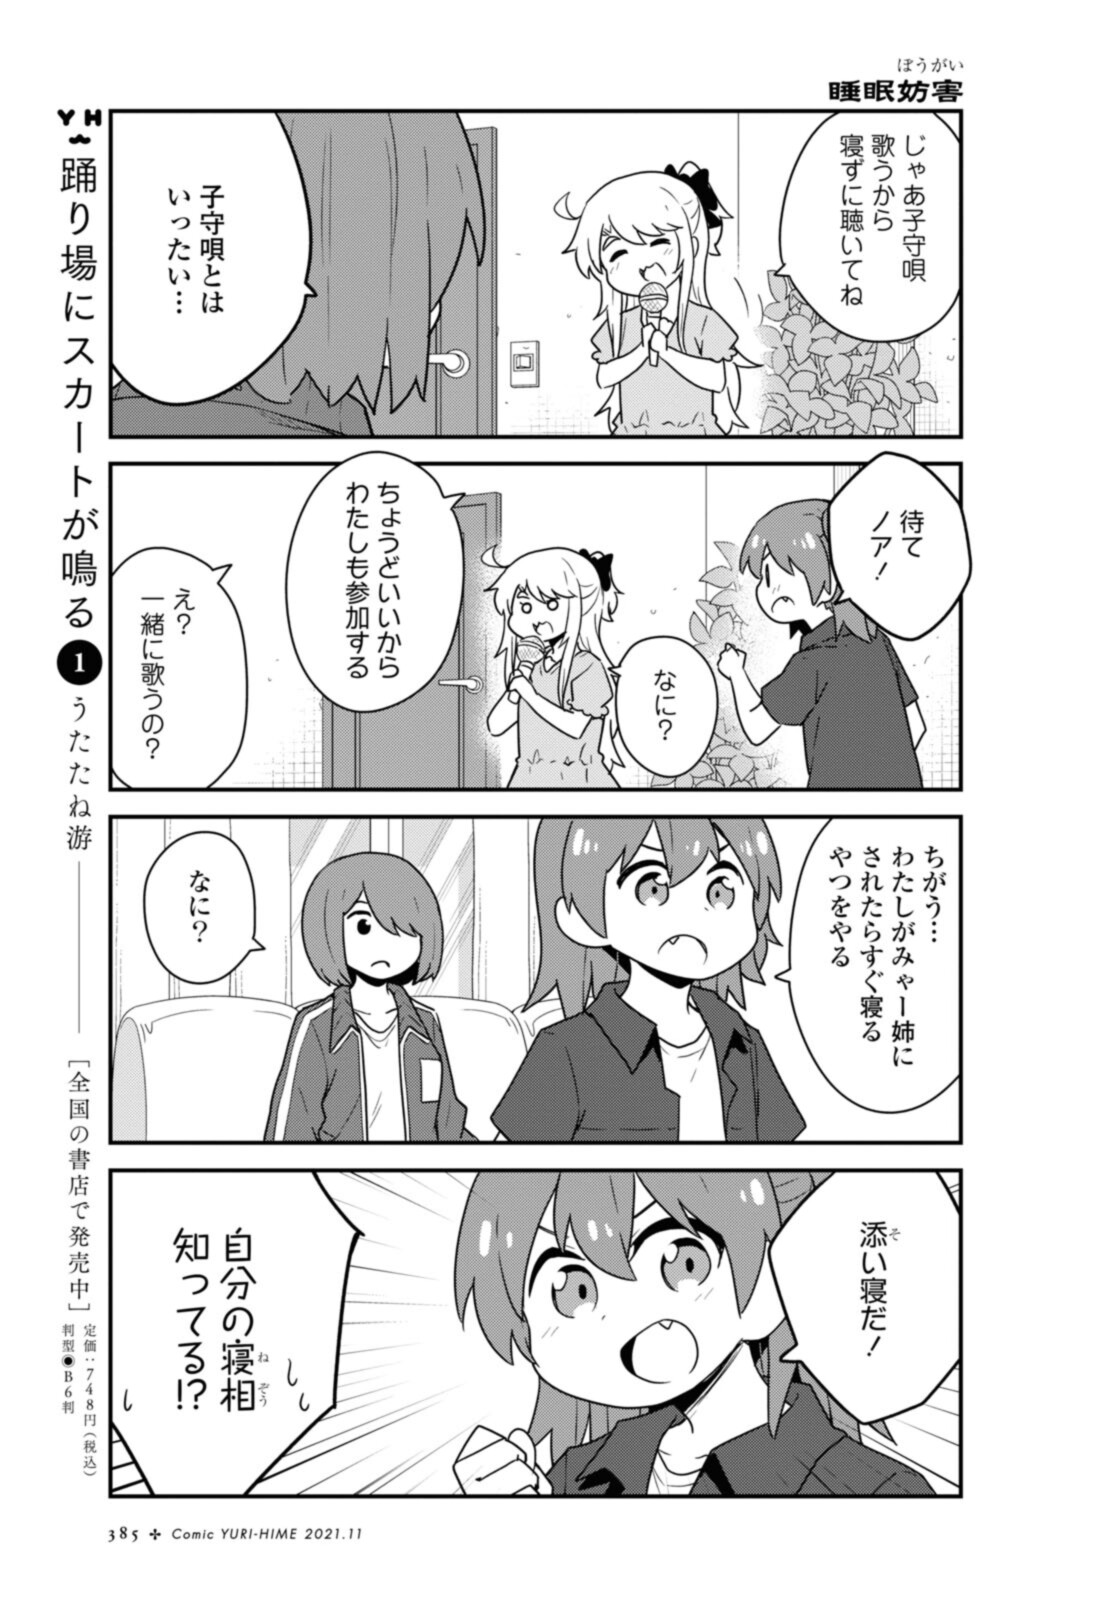 Wataten! An Angel Flew Down to Me 私に天使が舞い降りた！ 第87.1話 - Page 9